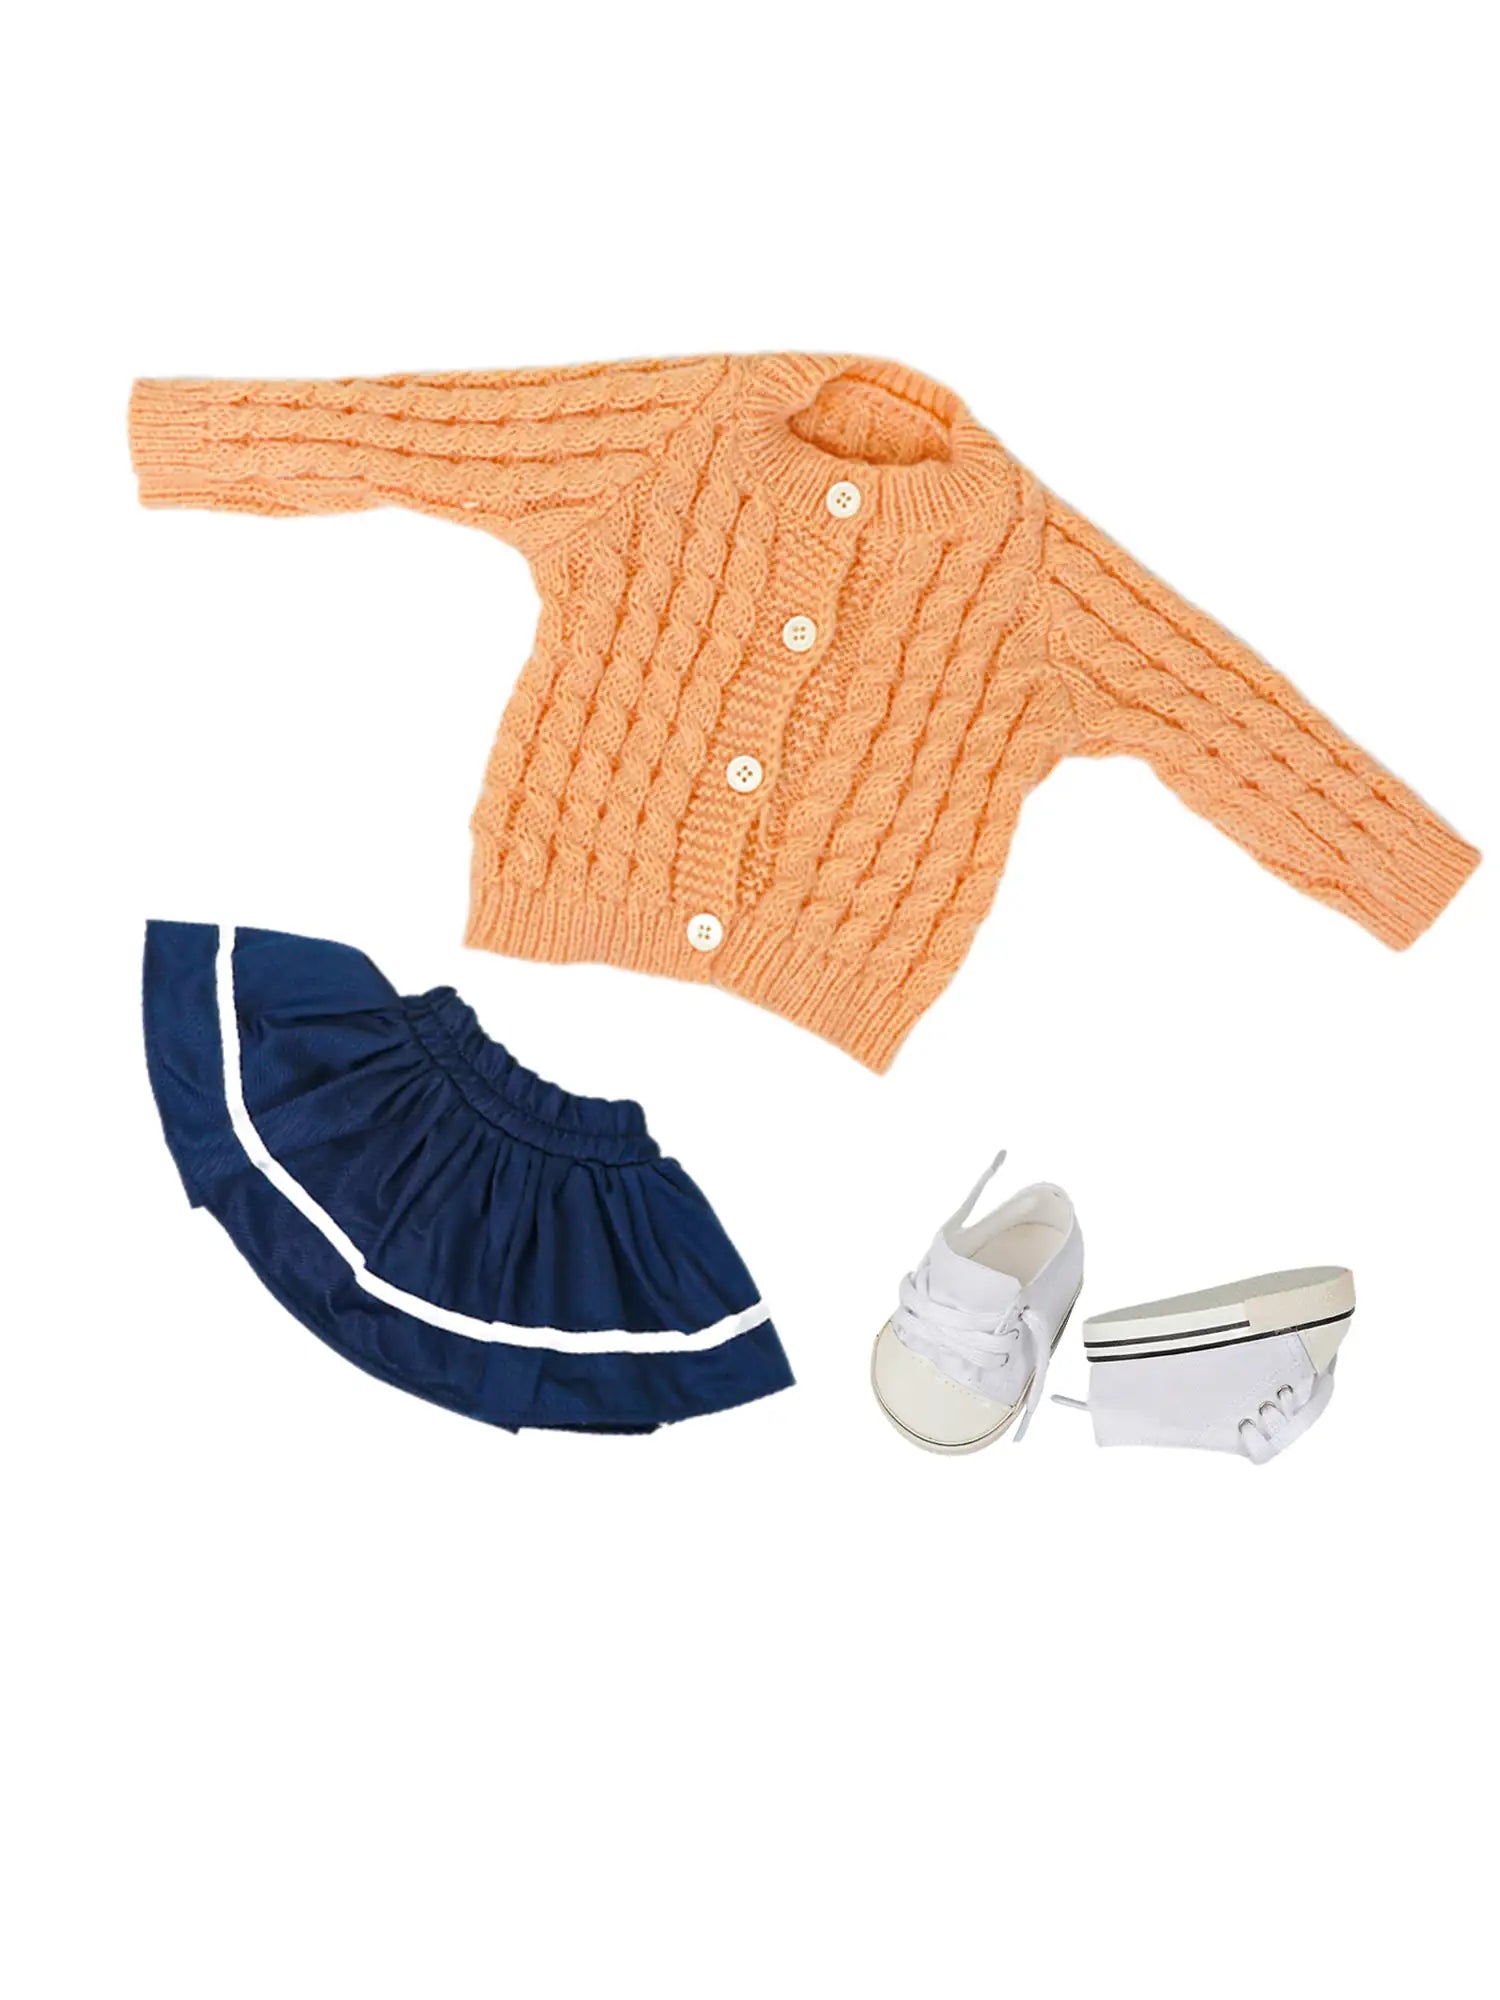 Crochet College Style Doll Clothing